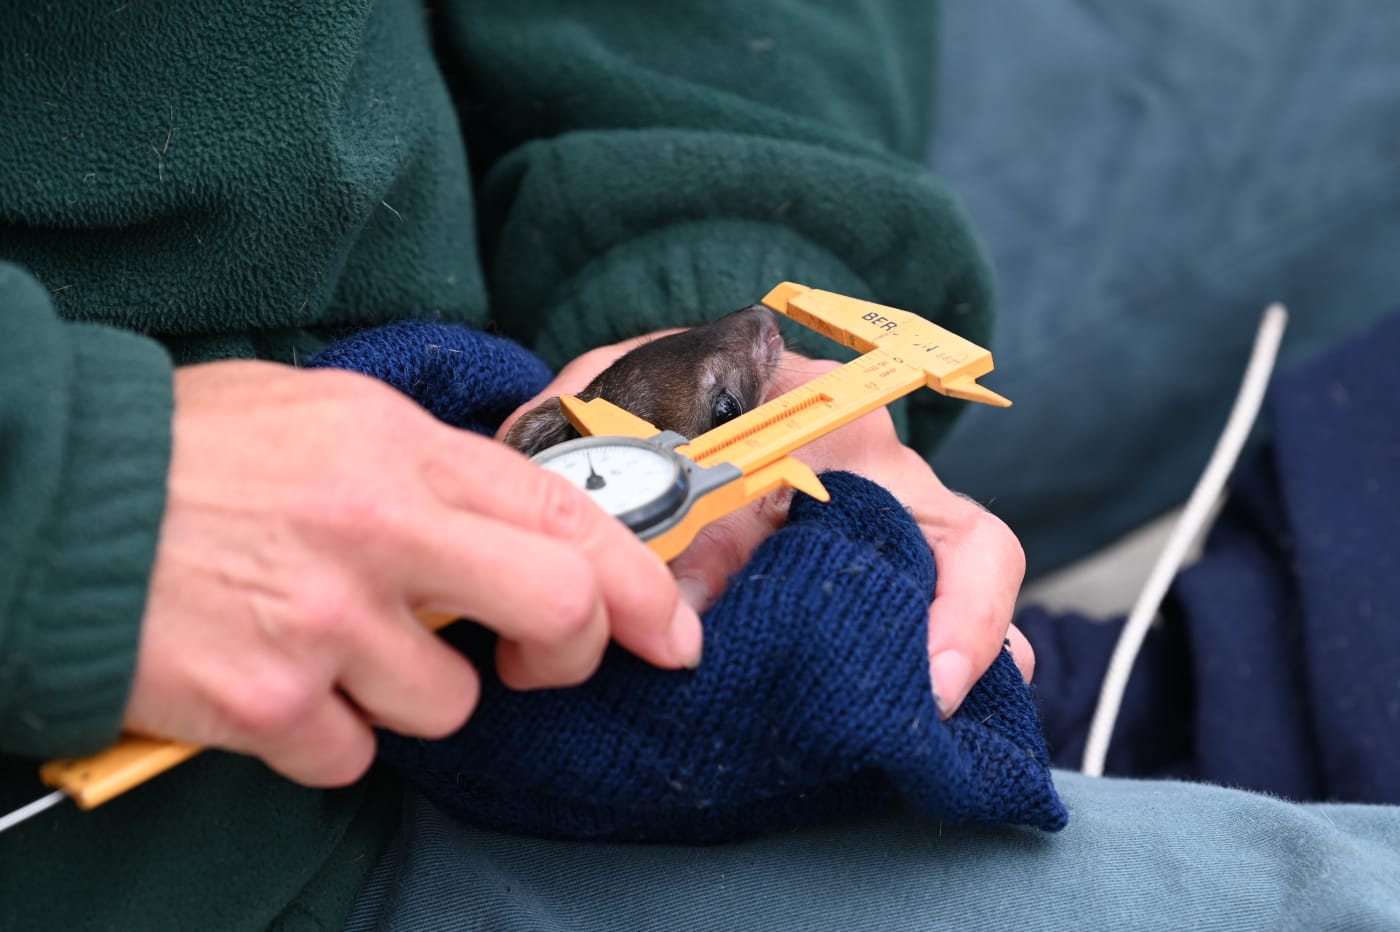 A woylie (or brush-tailed bettong) being measured in Western Australia